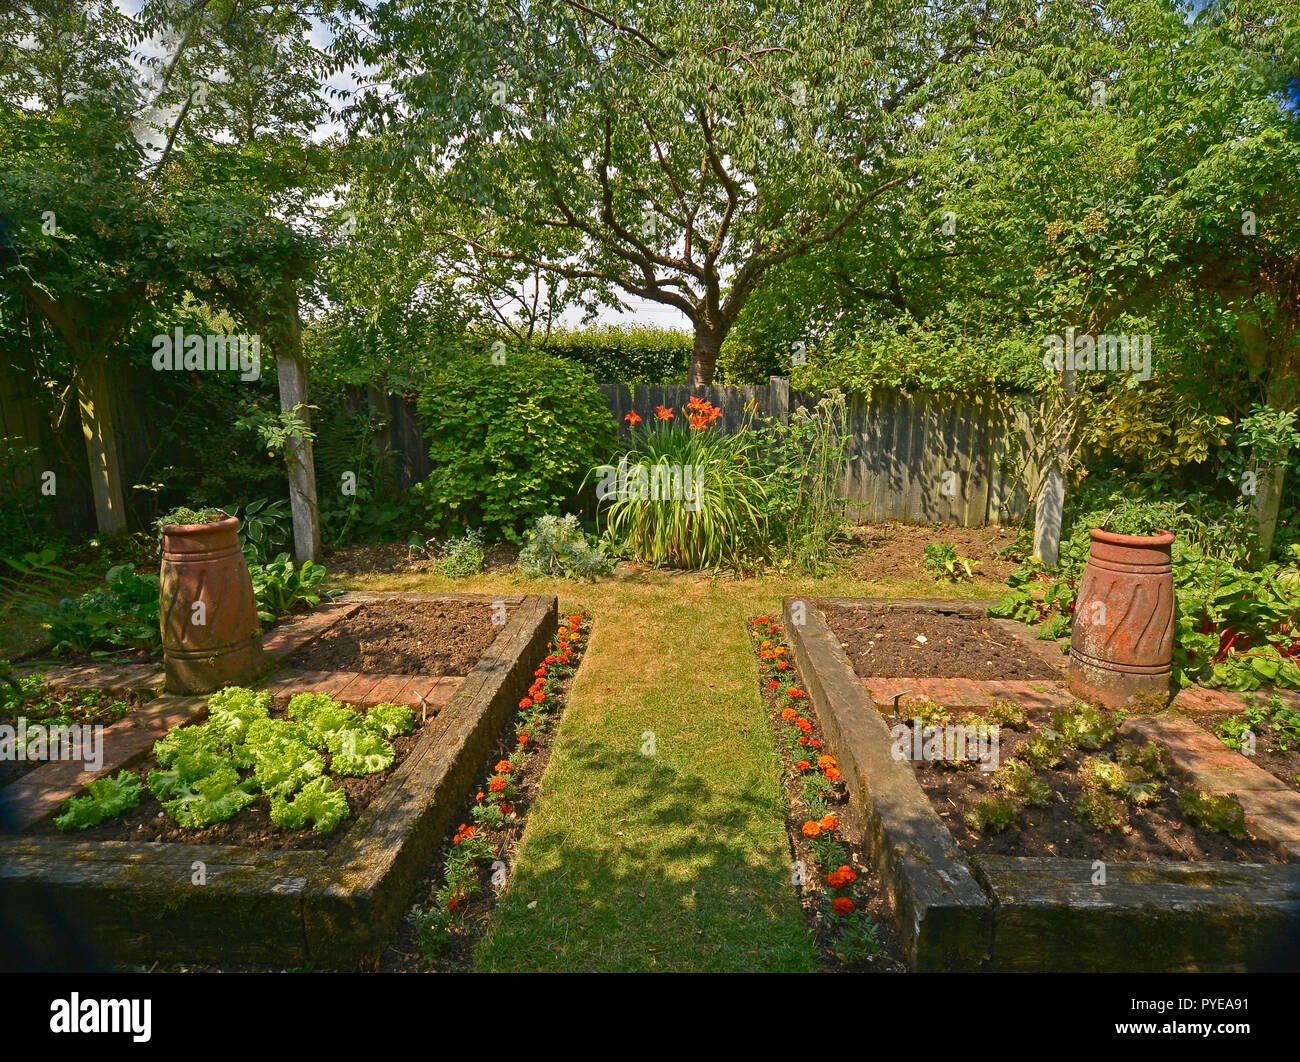 VEGETABLE GARDEN IN A PRIVATE GARDEN. AUGUST 2018. OAKHAM, RUTLAND, ENGLAND. Small planted enclosed vegetable gardens with raised beds Stock Photo